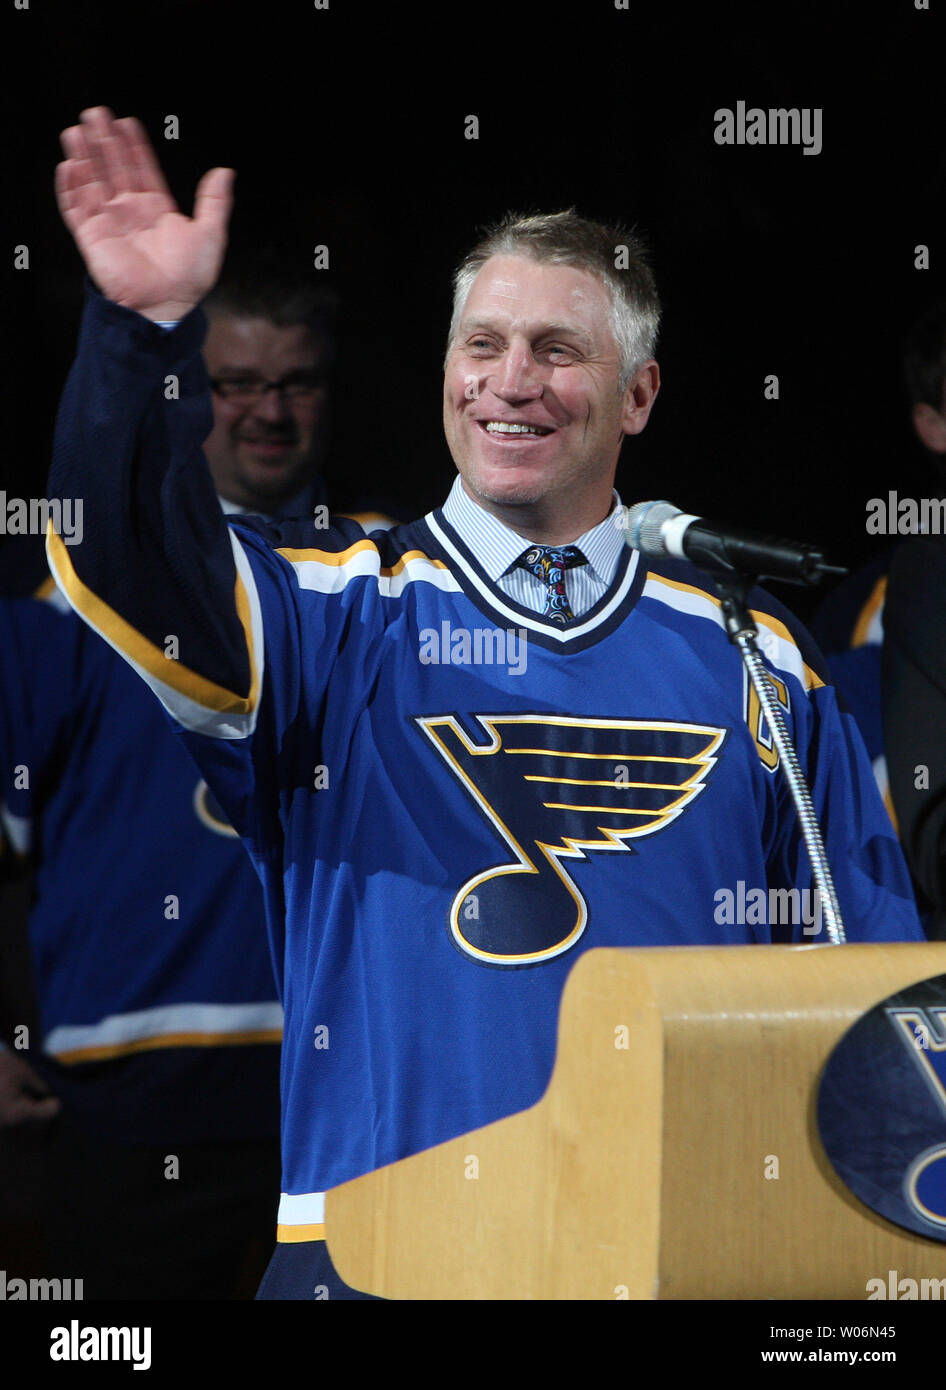 Former St. Louis Blues player and Hockey Hall of Fame member